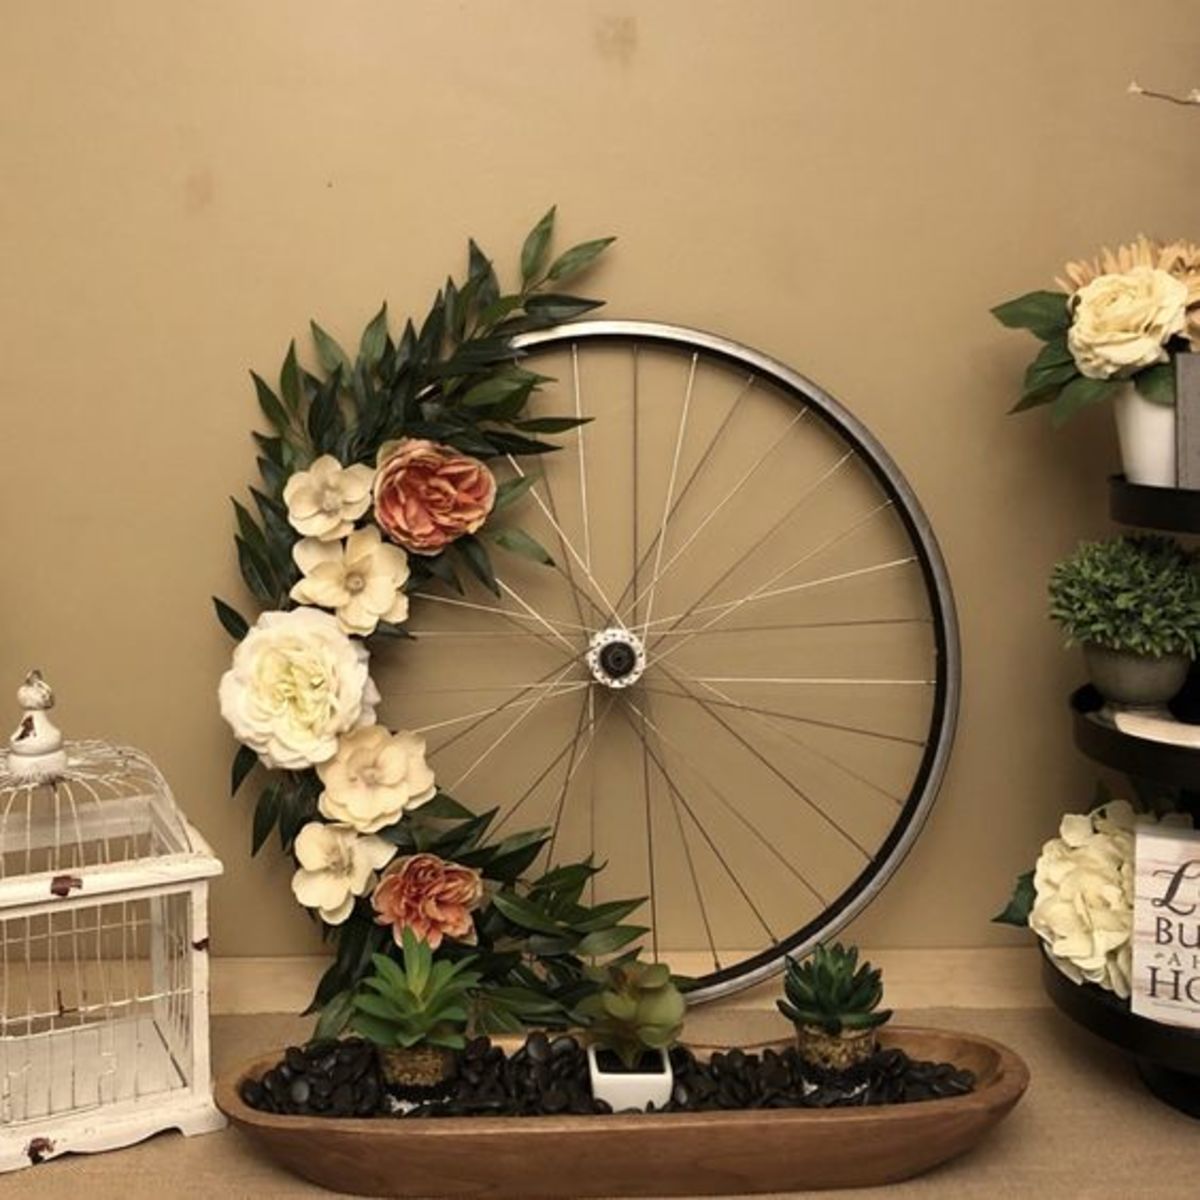 A simple but elegant bicycle wreath using flowers.